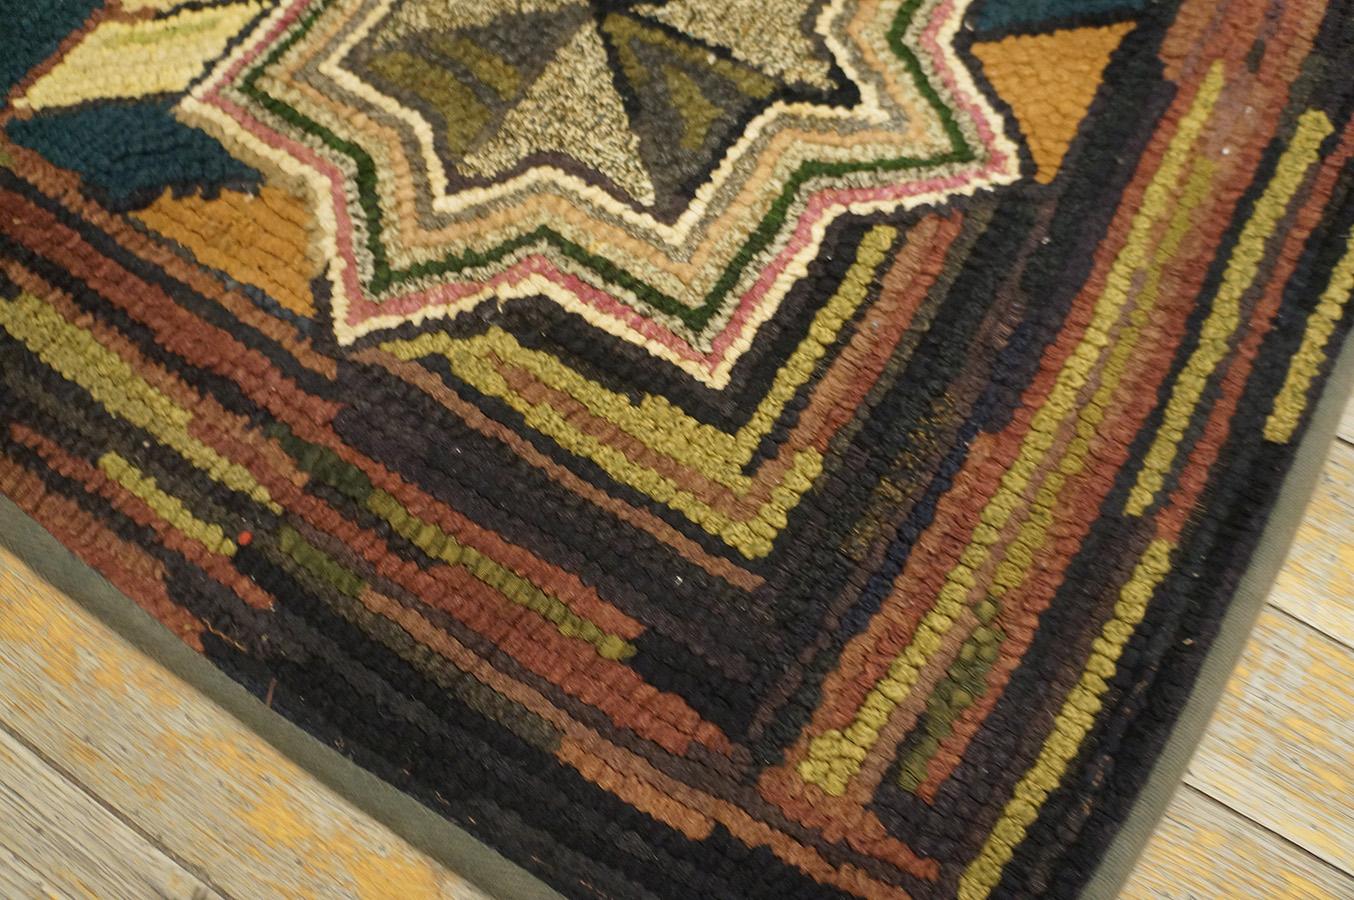 Early 20th Century American Hooked Rug ( 5' 9'' x 6'  - 175 x 182 cm ) For Sale 1